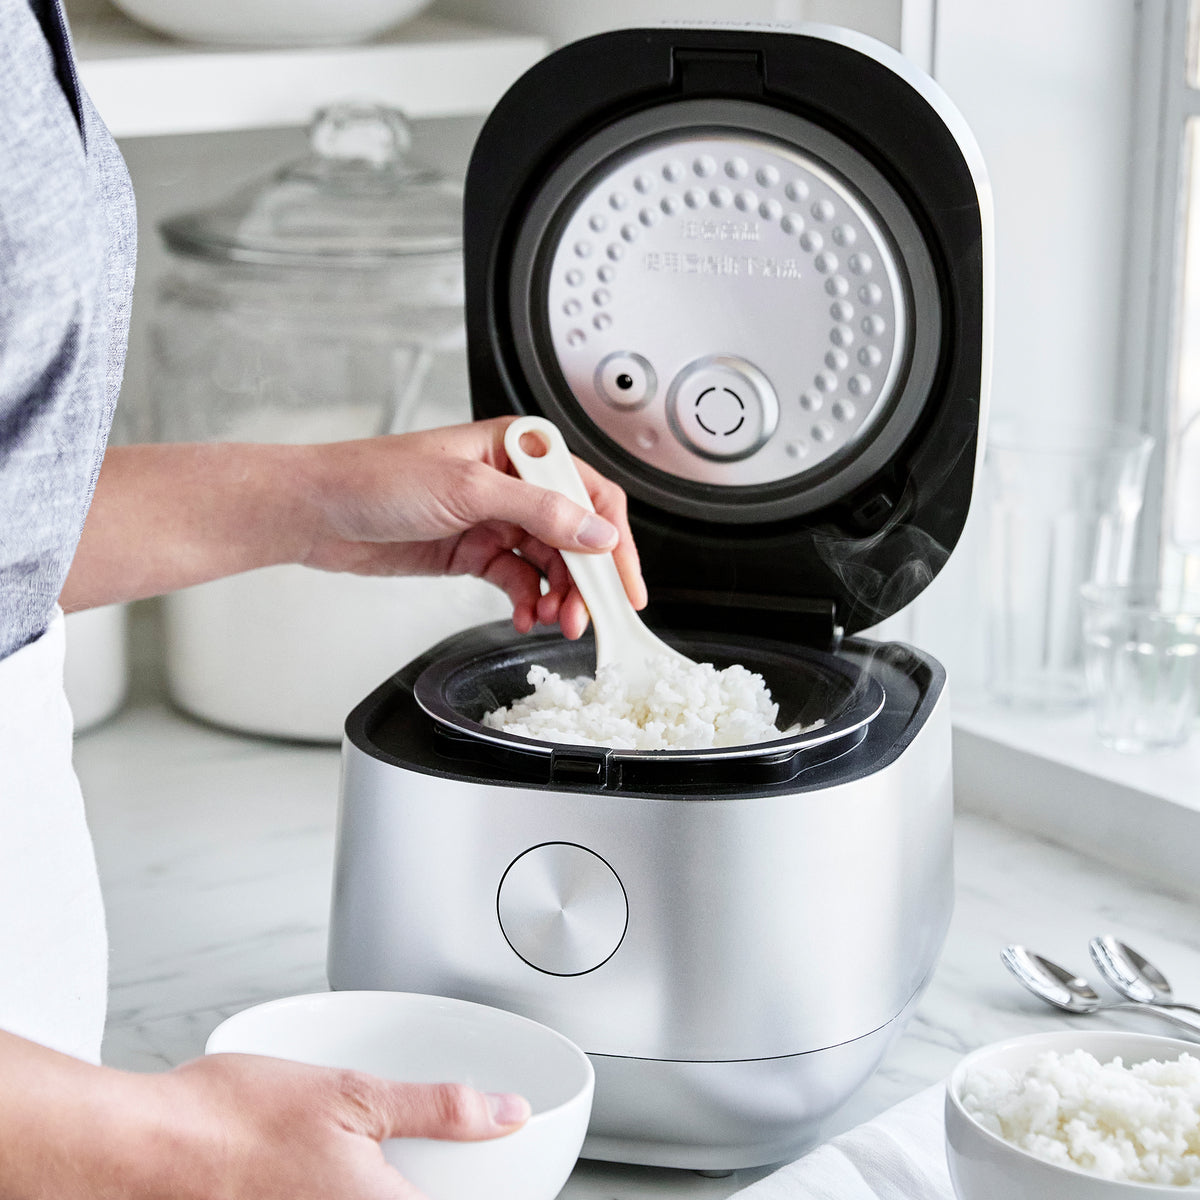 Are Instant Brands rice cookers dishwasher safe?